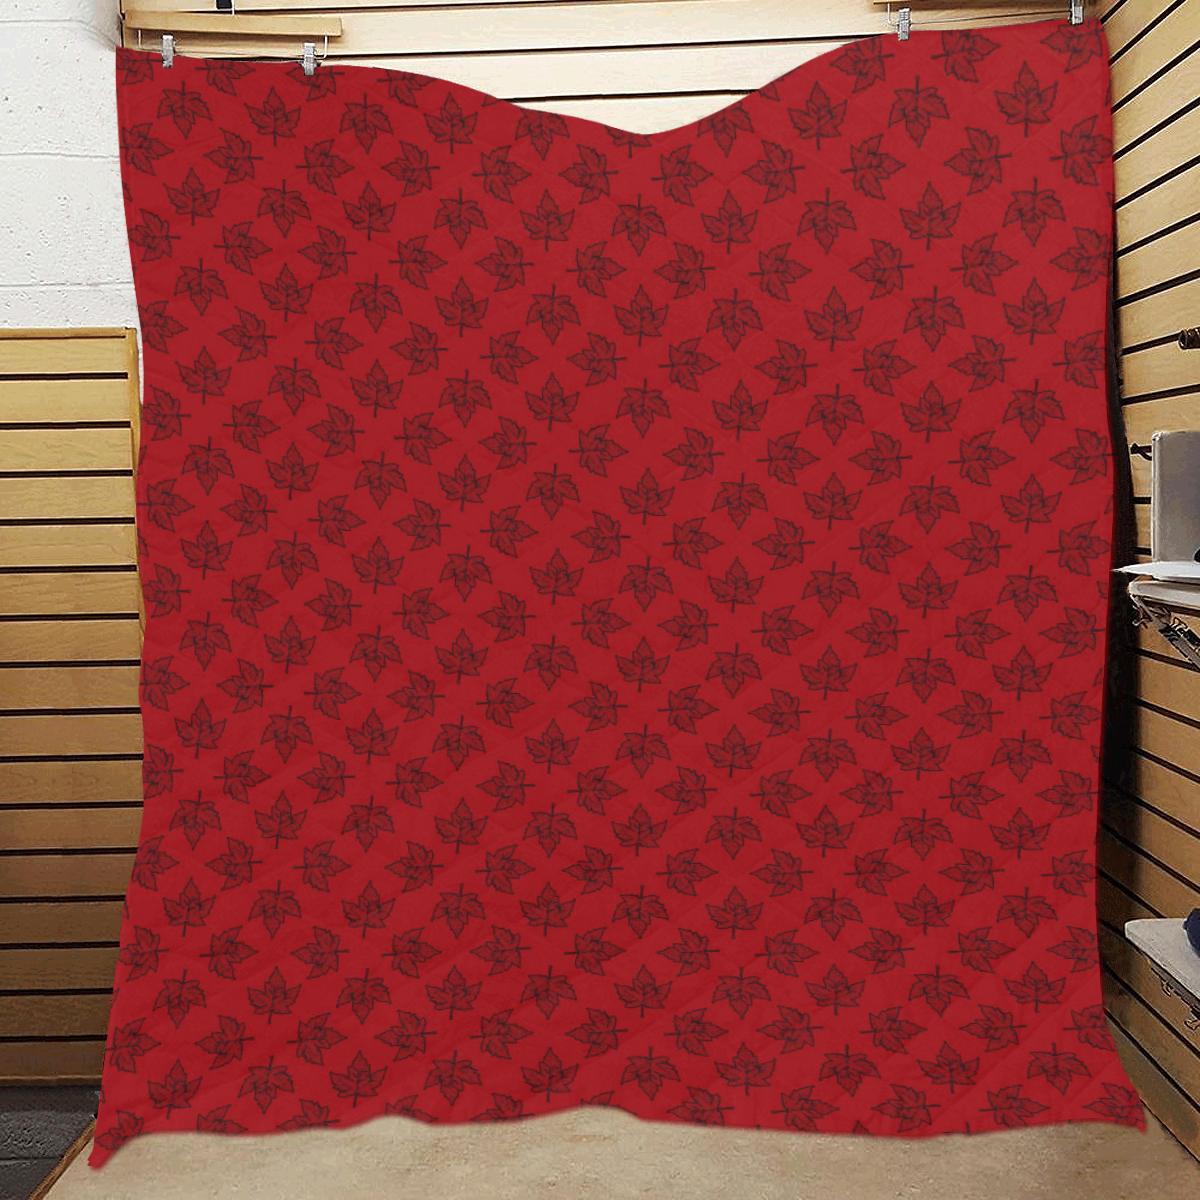 Cool Canada Quilt 60"x70"